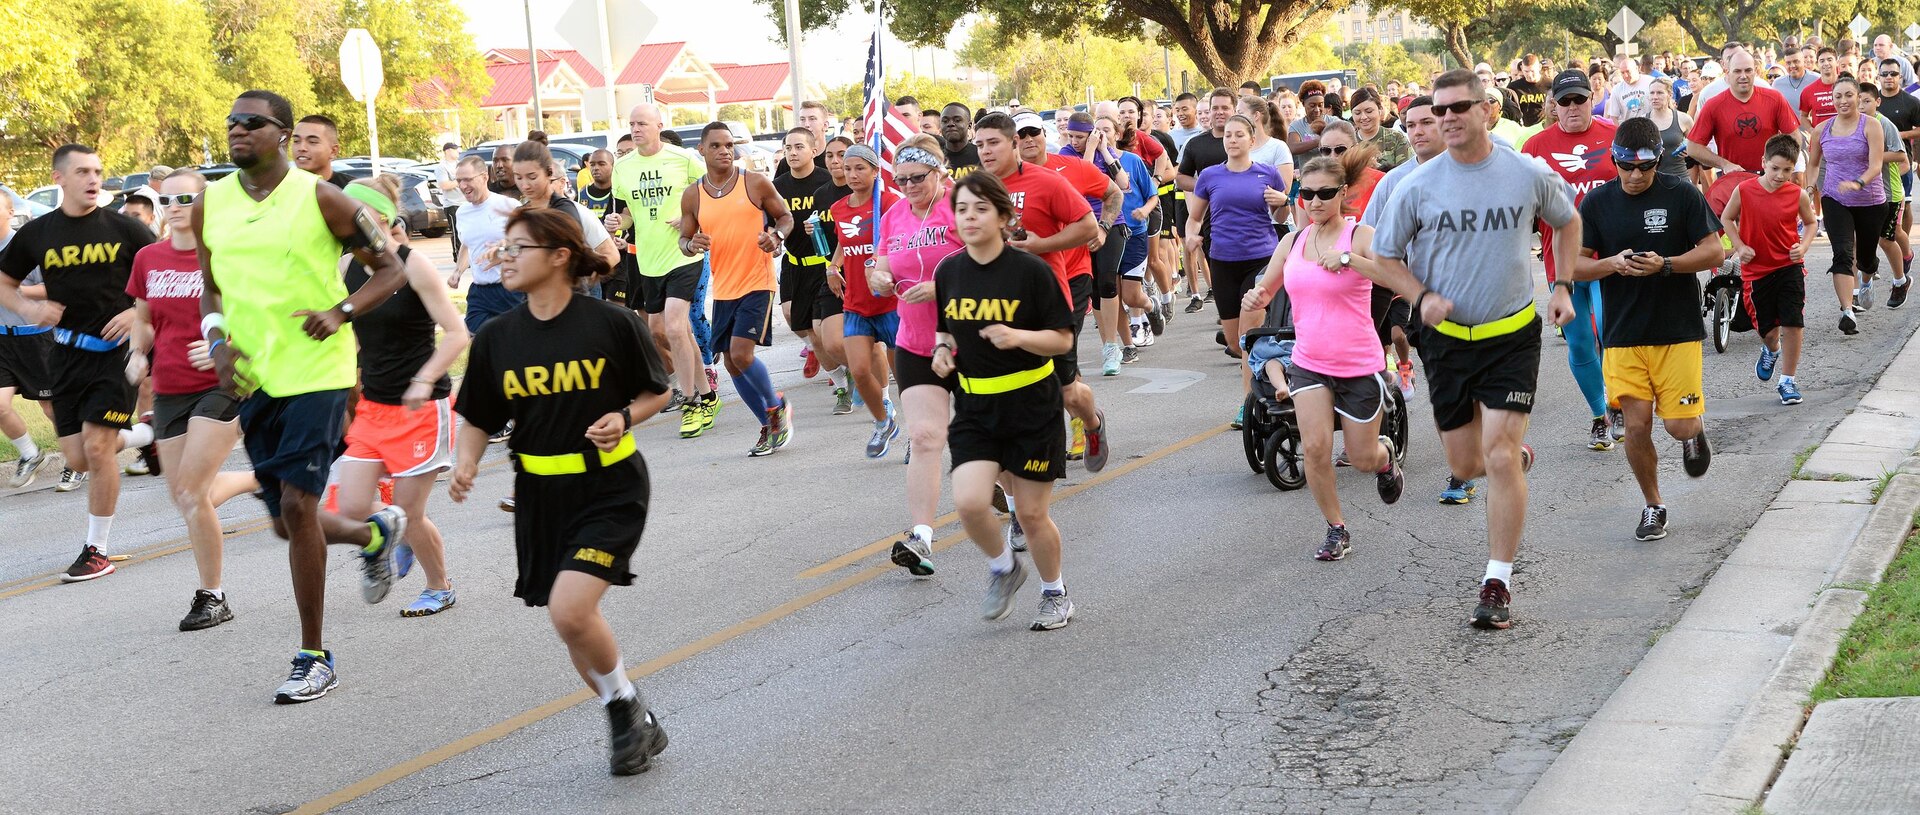 Hundreds of military members, civilian personnel and family members run down Stanley Road during the 2015 5K Run For Life at JBSA-Fort Sam Houston Sunday. Another run took place at Eberle Park on JBSA-Randolph Saturday and the final run is at the Gillum Fitness Center on JBSA-Lackland, with free registration at 7 a.m. and the run beginning at 8 a.m. Sept. 26. The events promote awareness of the resources available to assist service members and their families with fitness, resiliency and suicide prevention. The top three male and female runners will win awards and all participants receive an “I Run For Life” reflective belt and finisher’s dog tag, while supplies last. For more information, visit http://www.facebook.com/JBSArunforlife and http://www.facebook.com/JointBaseSanAntonio.